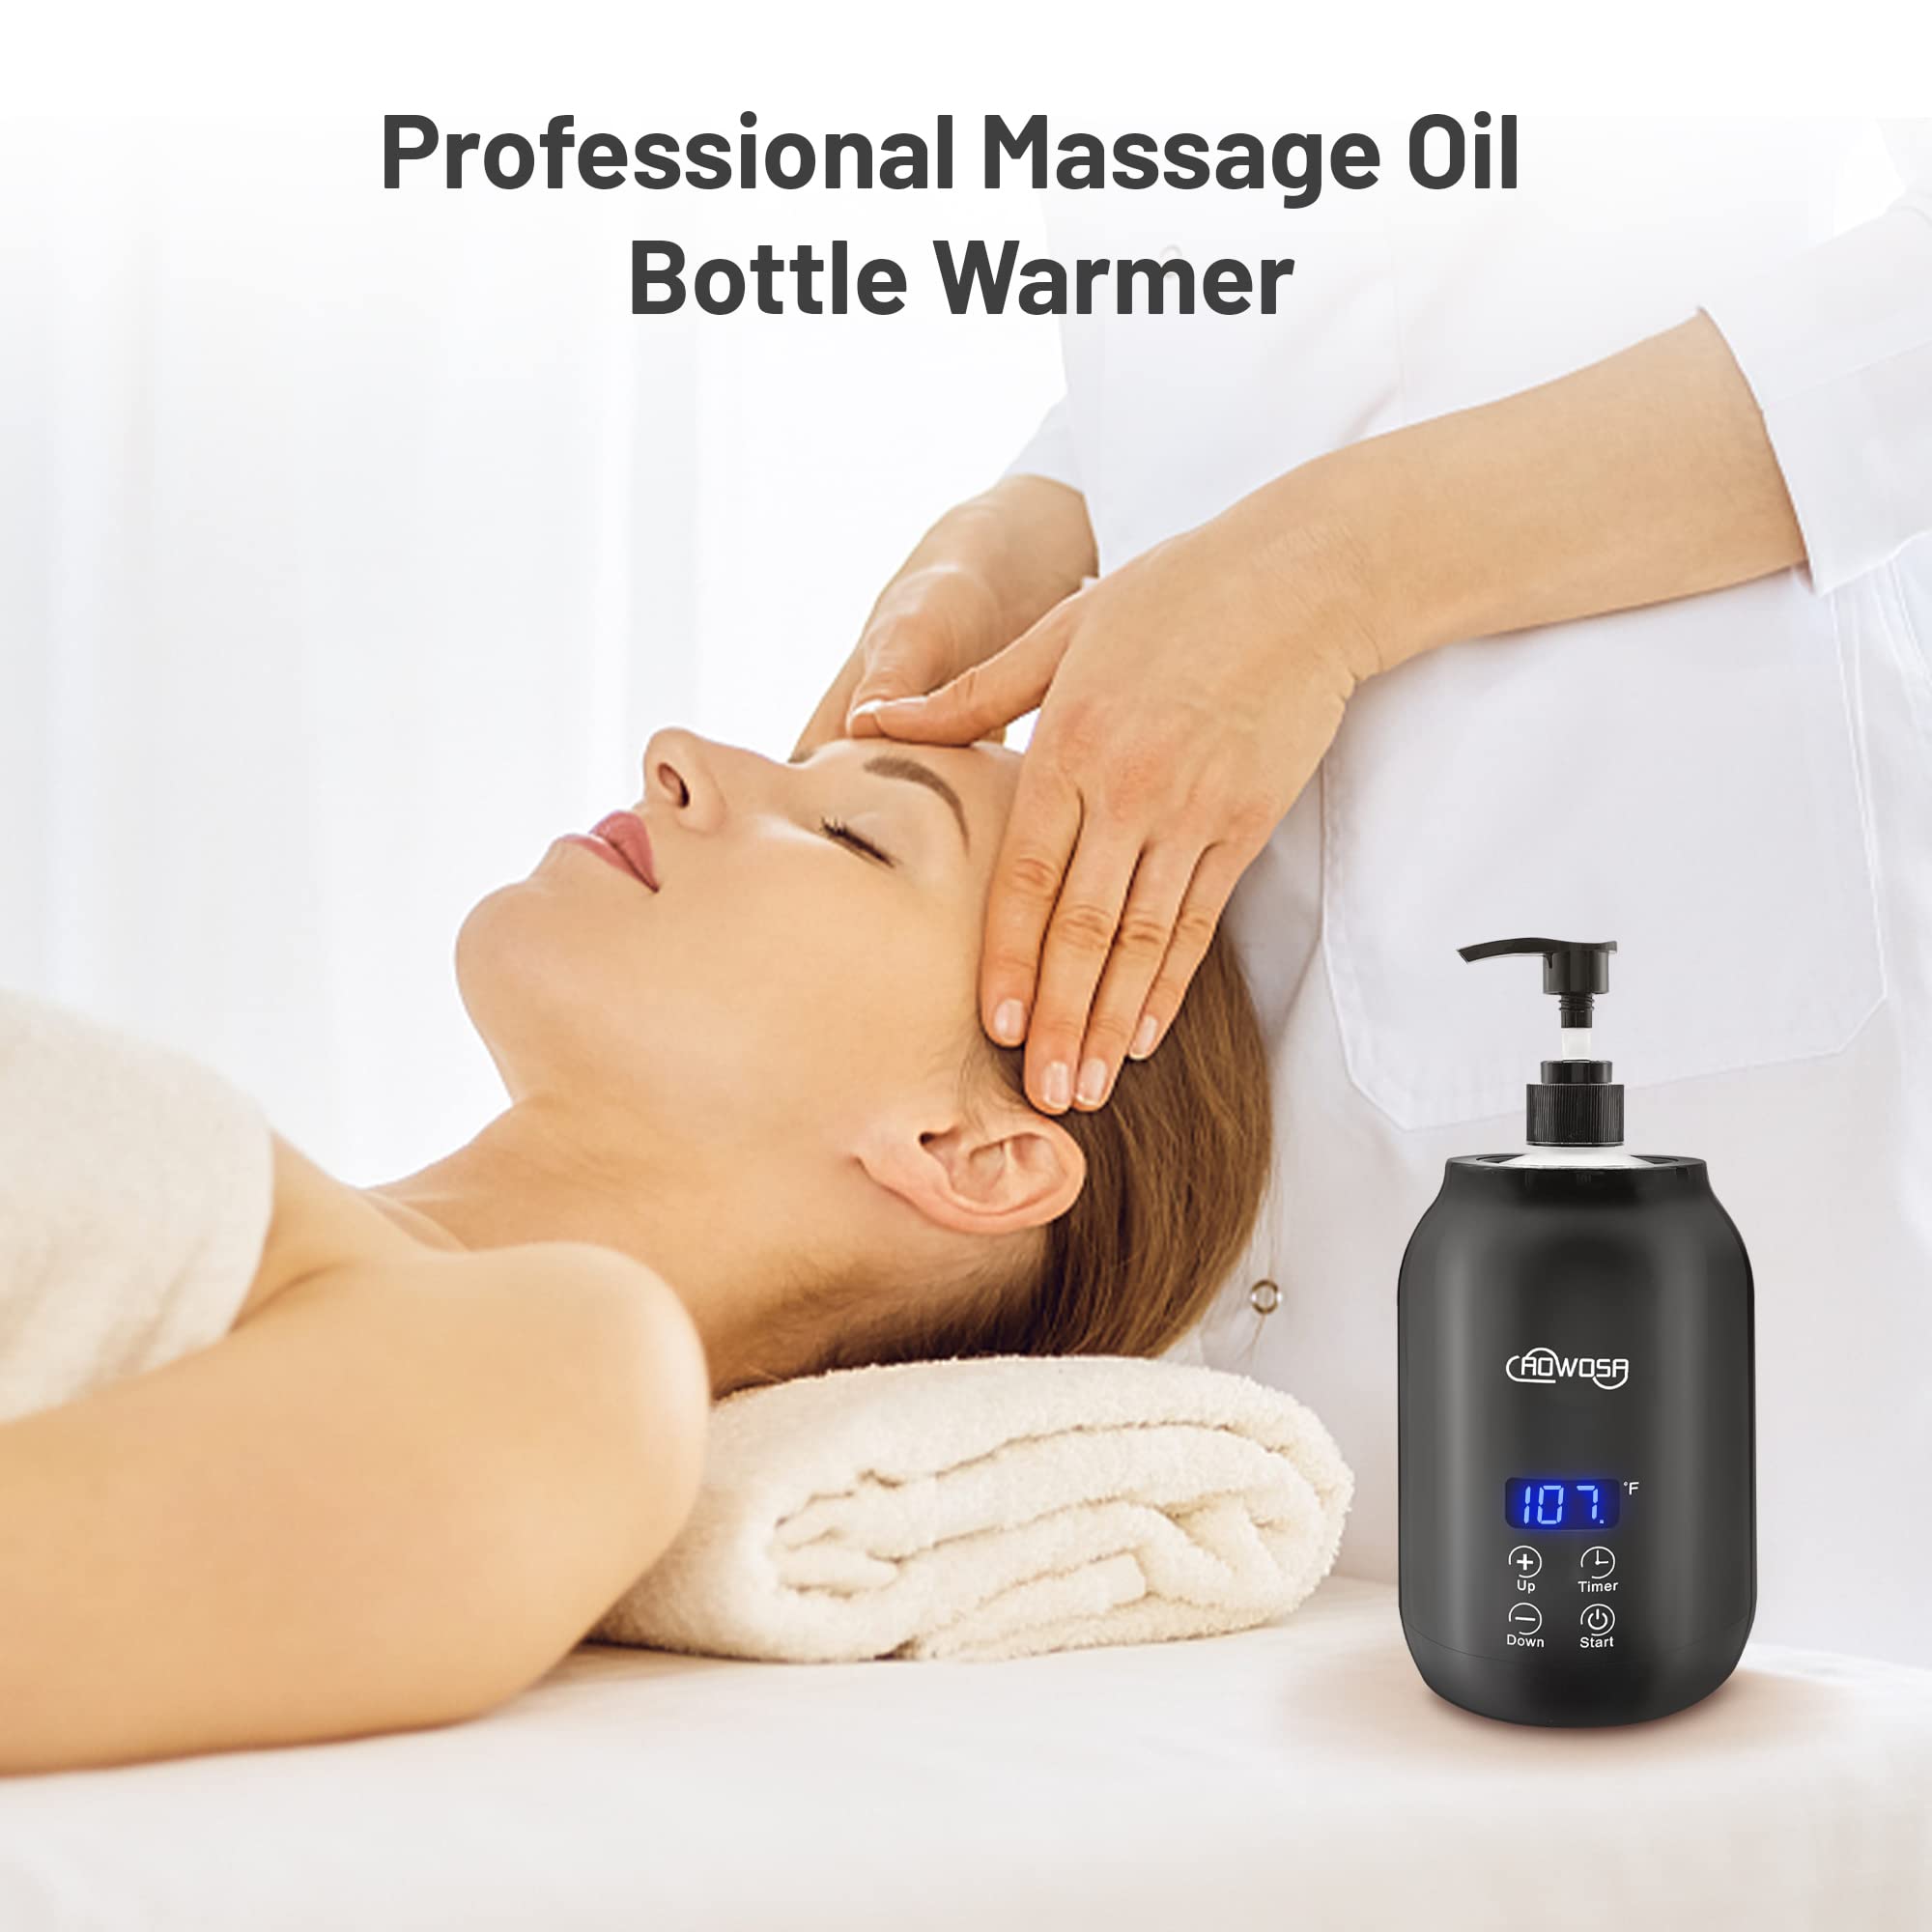 Massage Oil Warmer Bottle Professional Electric Lotion Digital Heater for SPA, Automatic Oil Warmer Heated Oil Lotion Cream for Salon, Barber Shops, Home, with Two Oil Bottle Dispenser (Black)